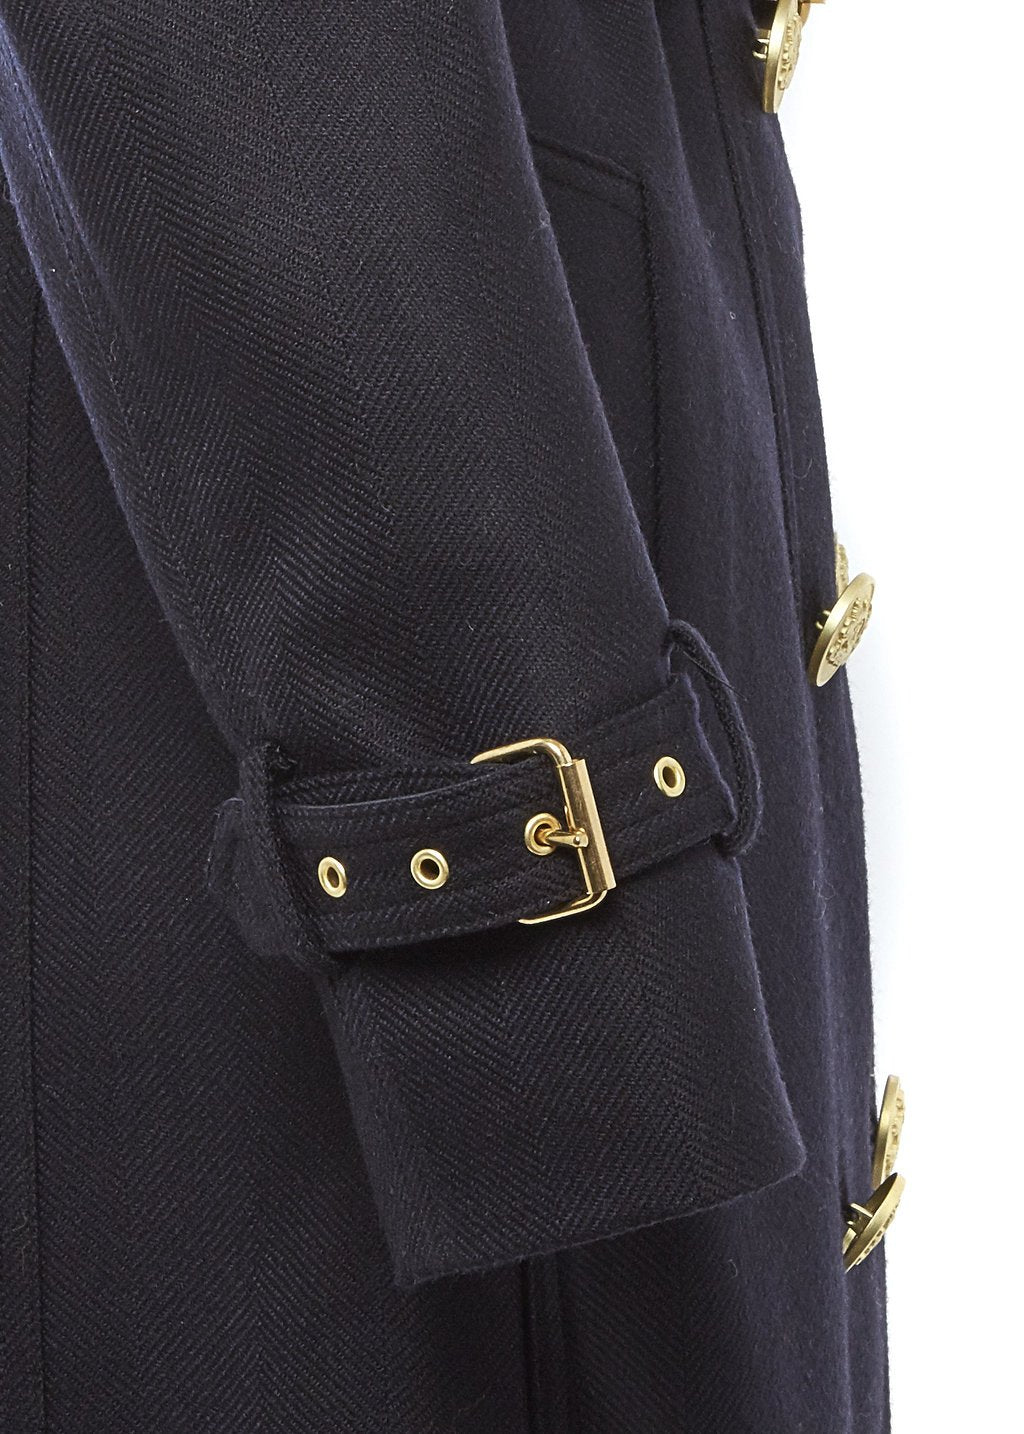 Arm detail of womens navy detailed with gold hardware knee length wool trench coat